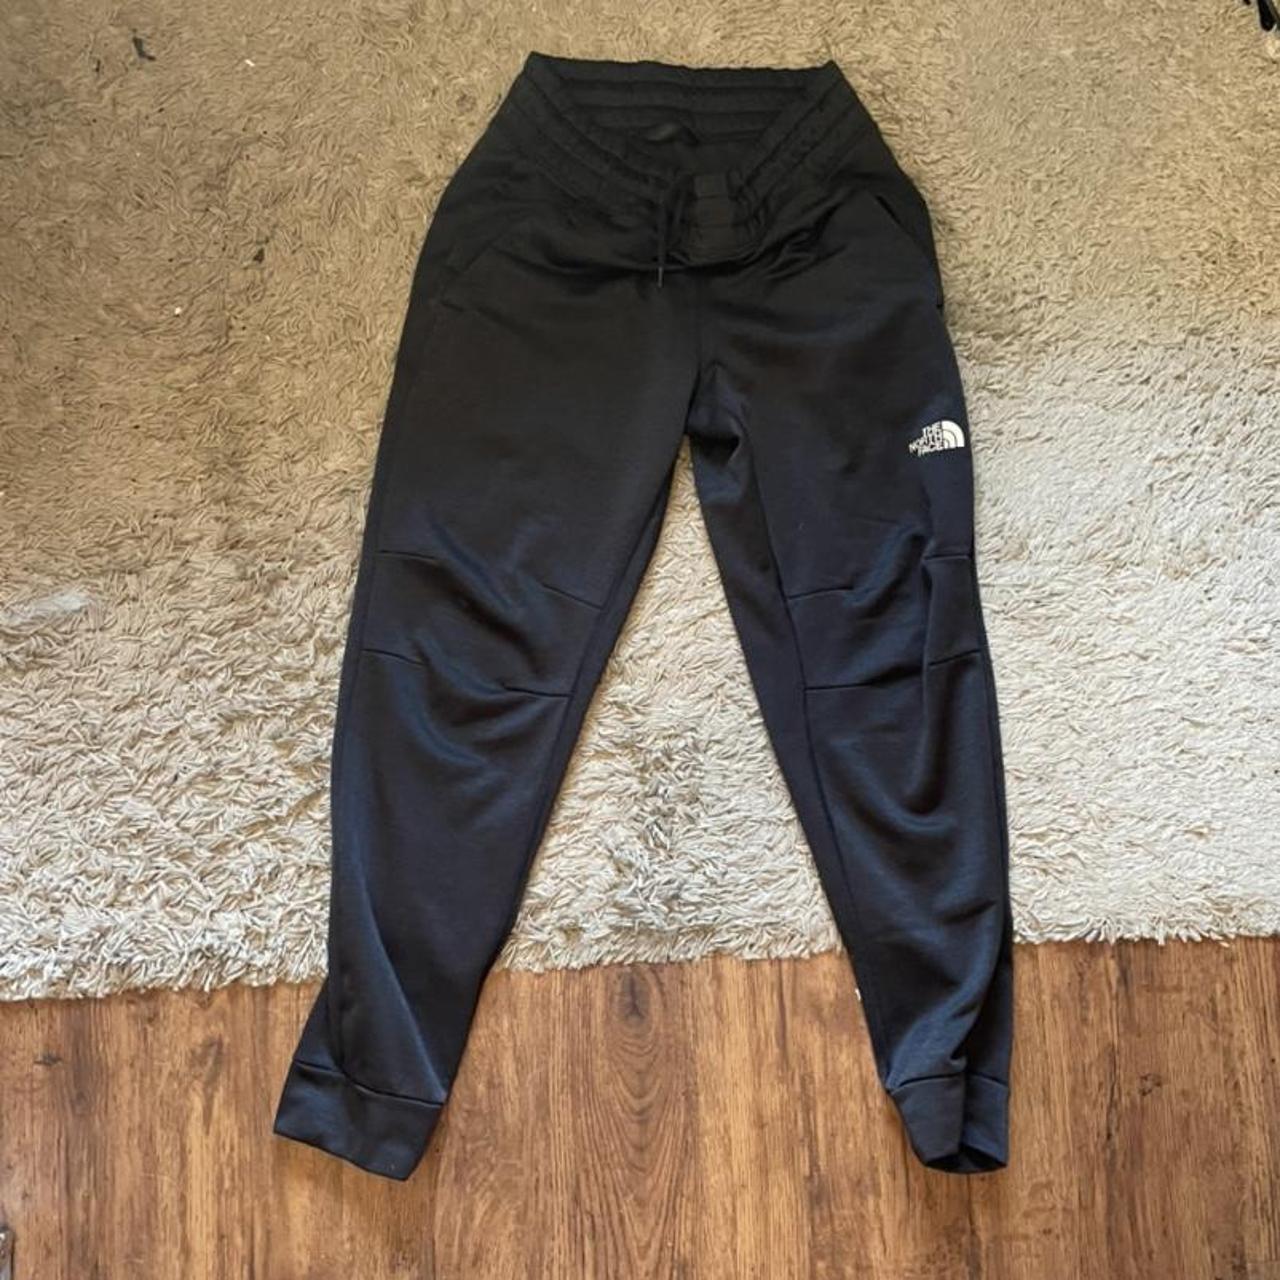 North Face Bottoms - North Face Tracksuit - North... - Depop